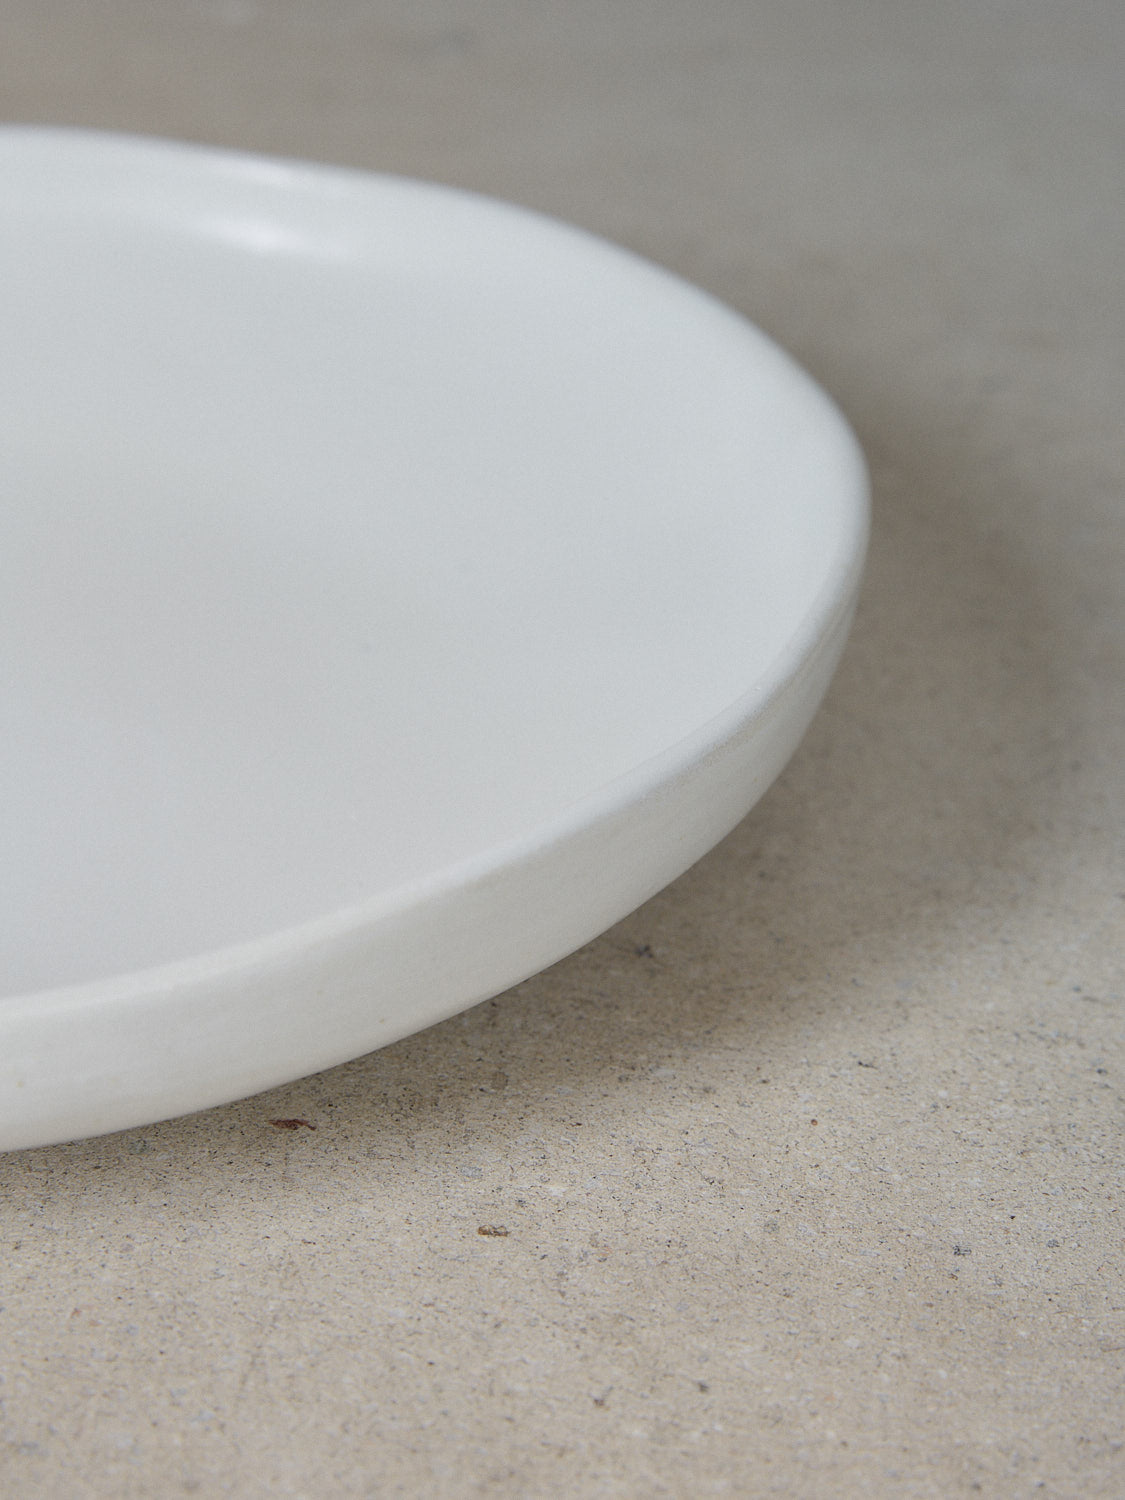 Large Raw Serving Bowl in Ecru. Handmade deep serving bowl perfect for entertaining and everyday use in classic matte white stoneware.